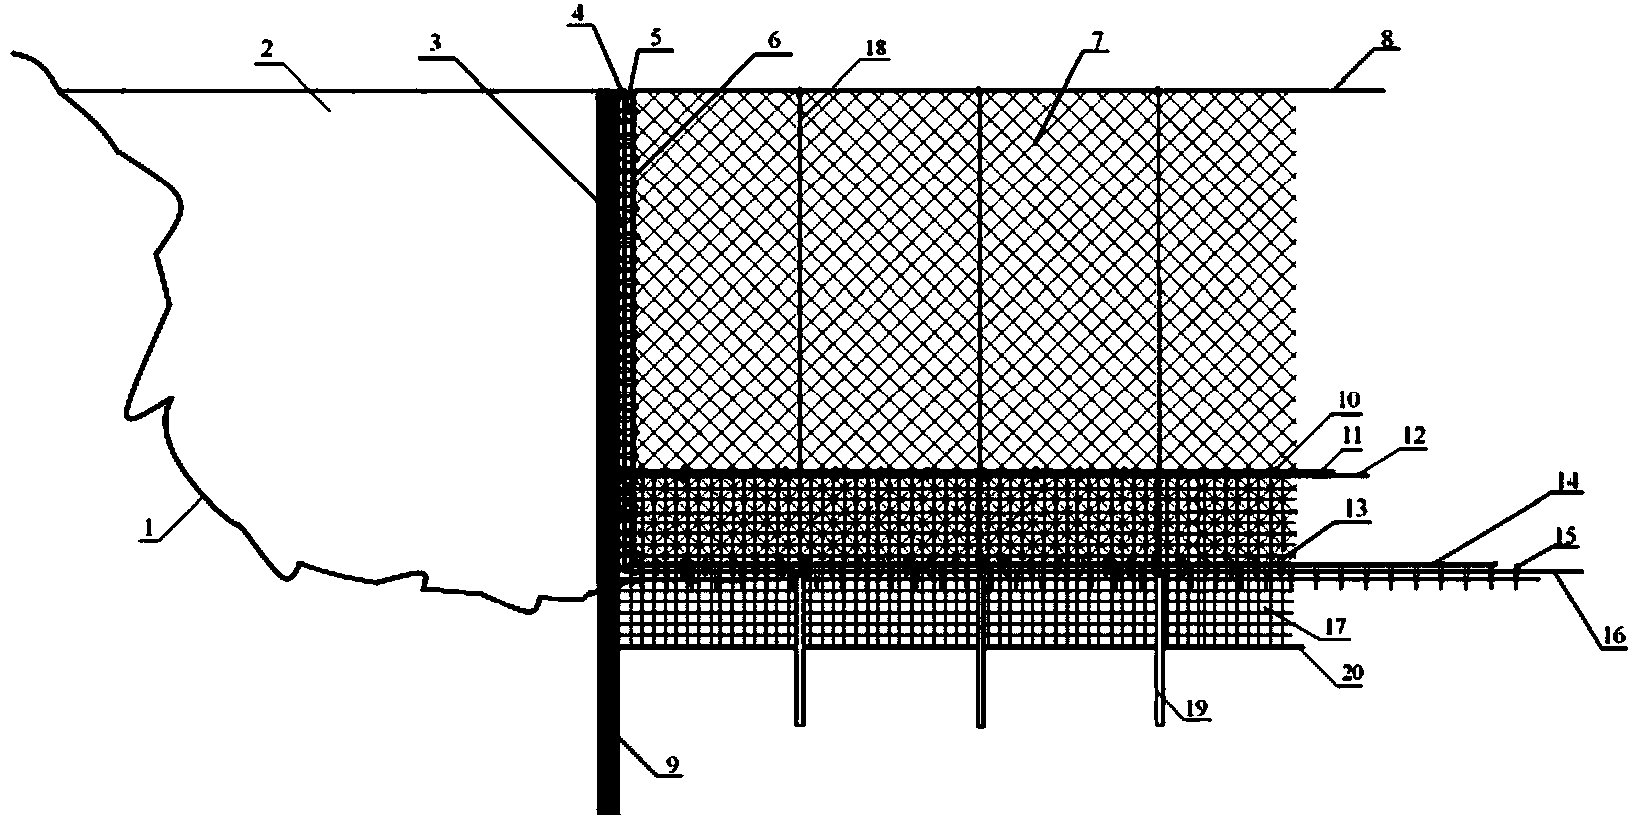 Method of fitting large fishing tackle net between two shores